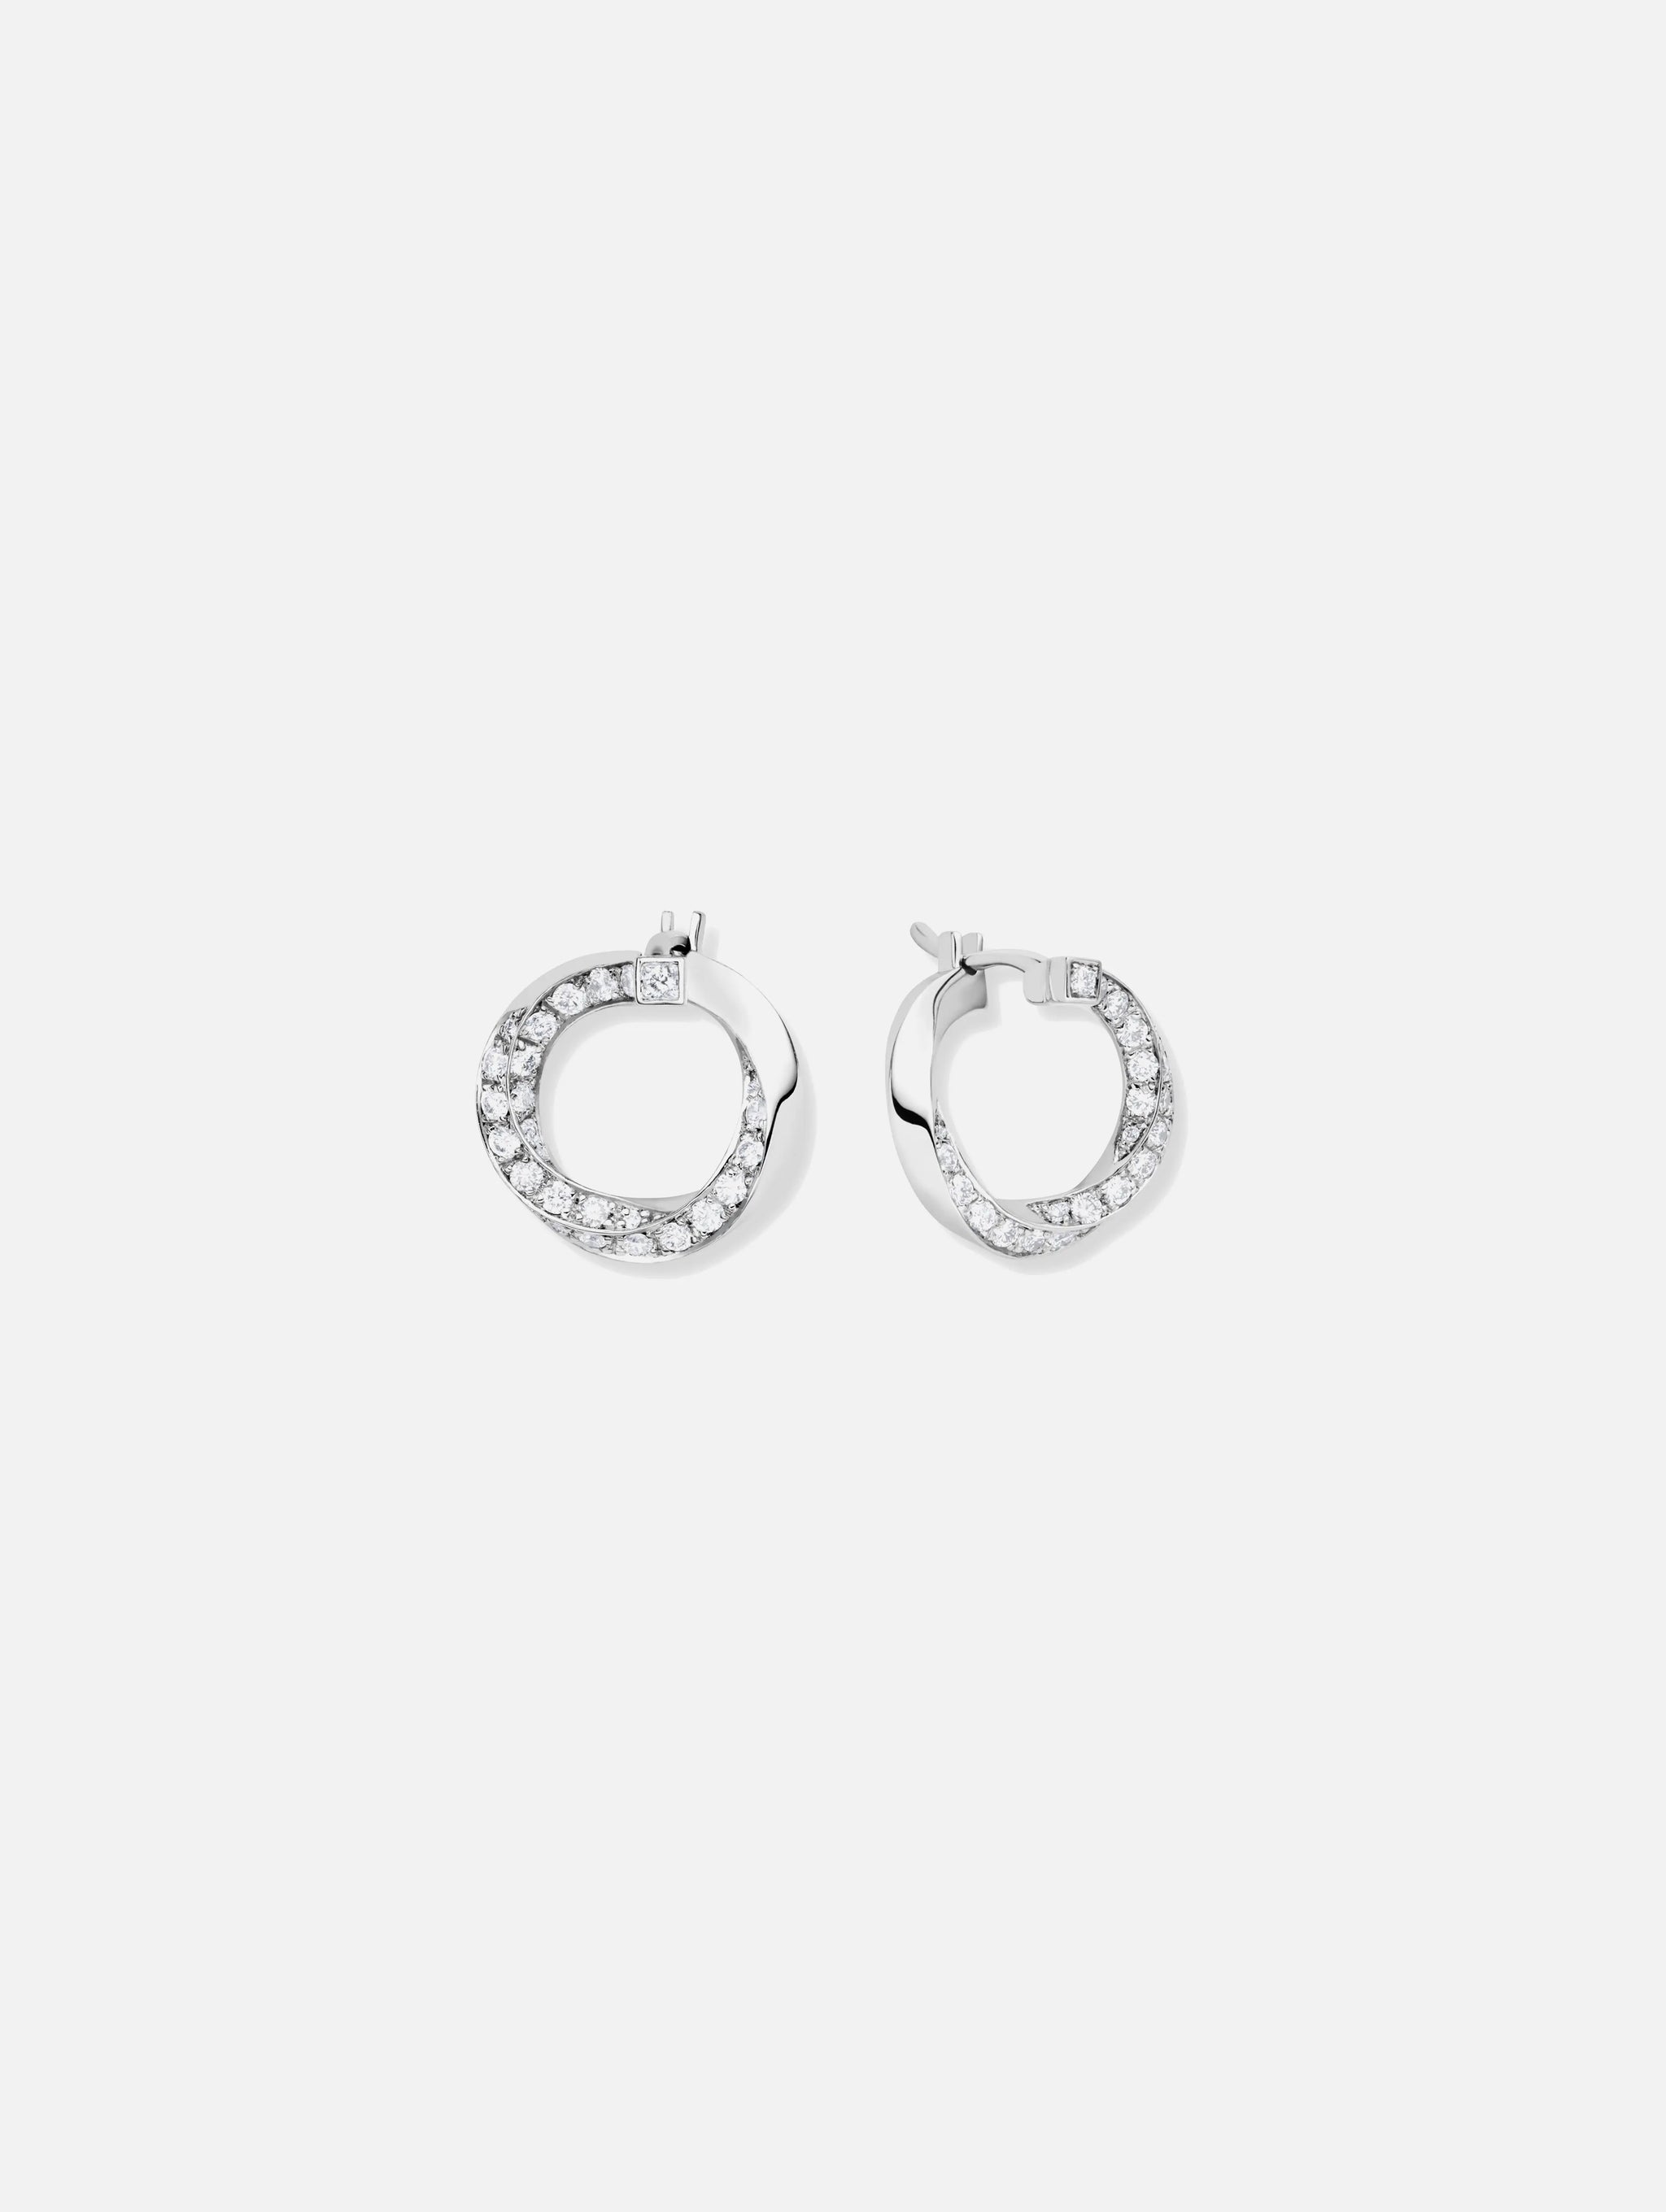 Diamond Thread Earrings in White Gold - Nouvel Heritage - Nouvel Heritage